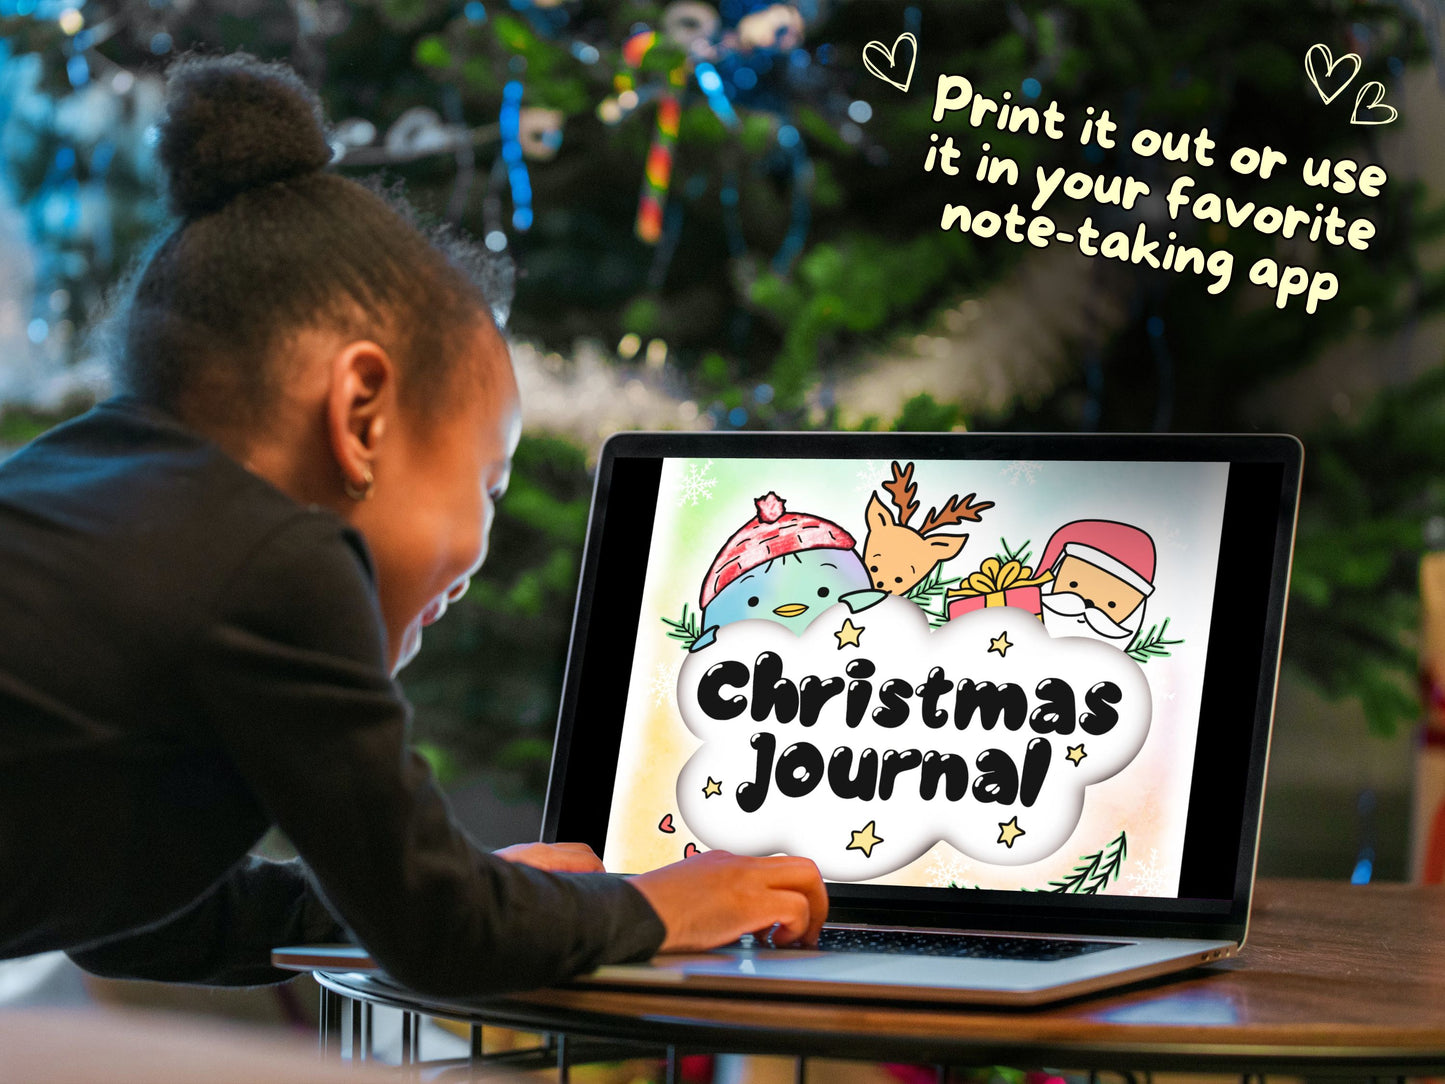 Christmas Journal - print it out or use it digitally.